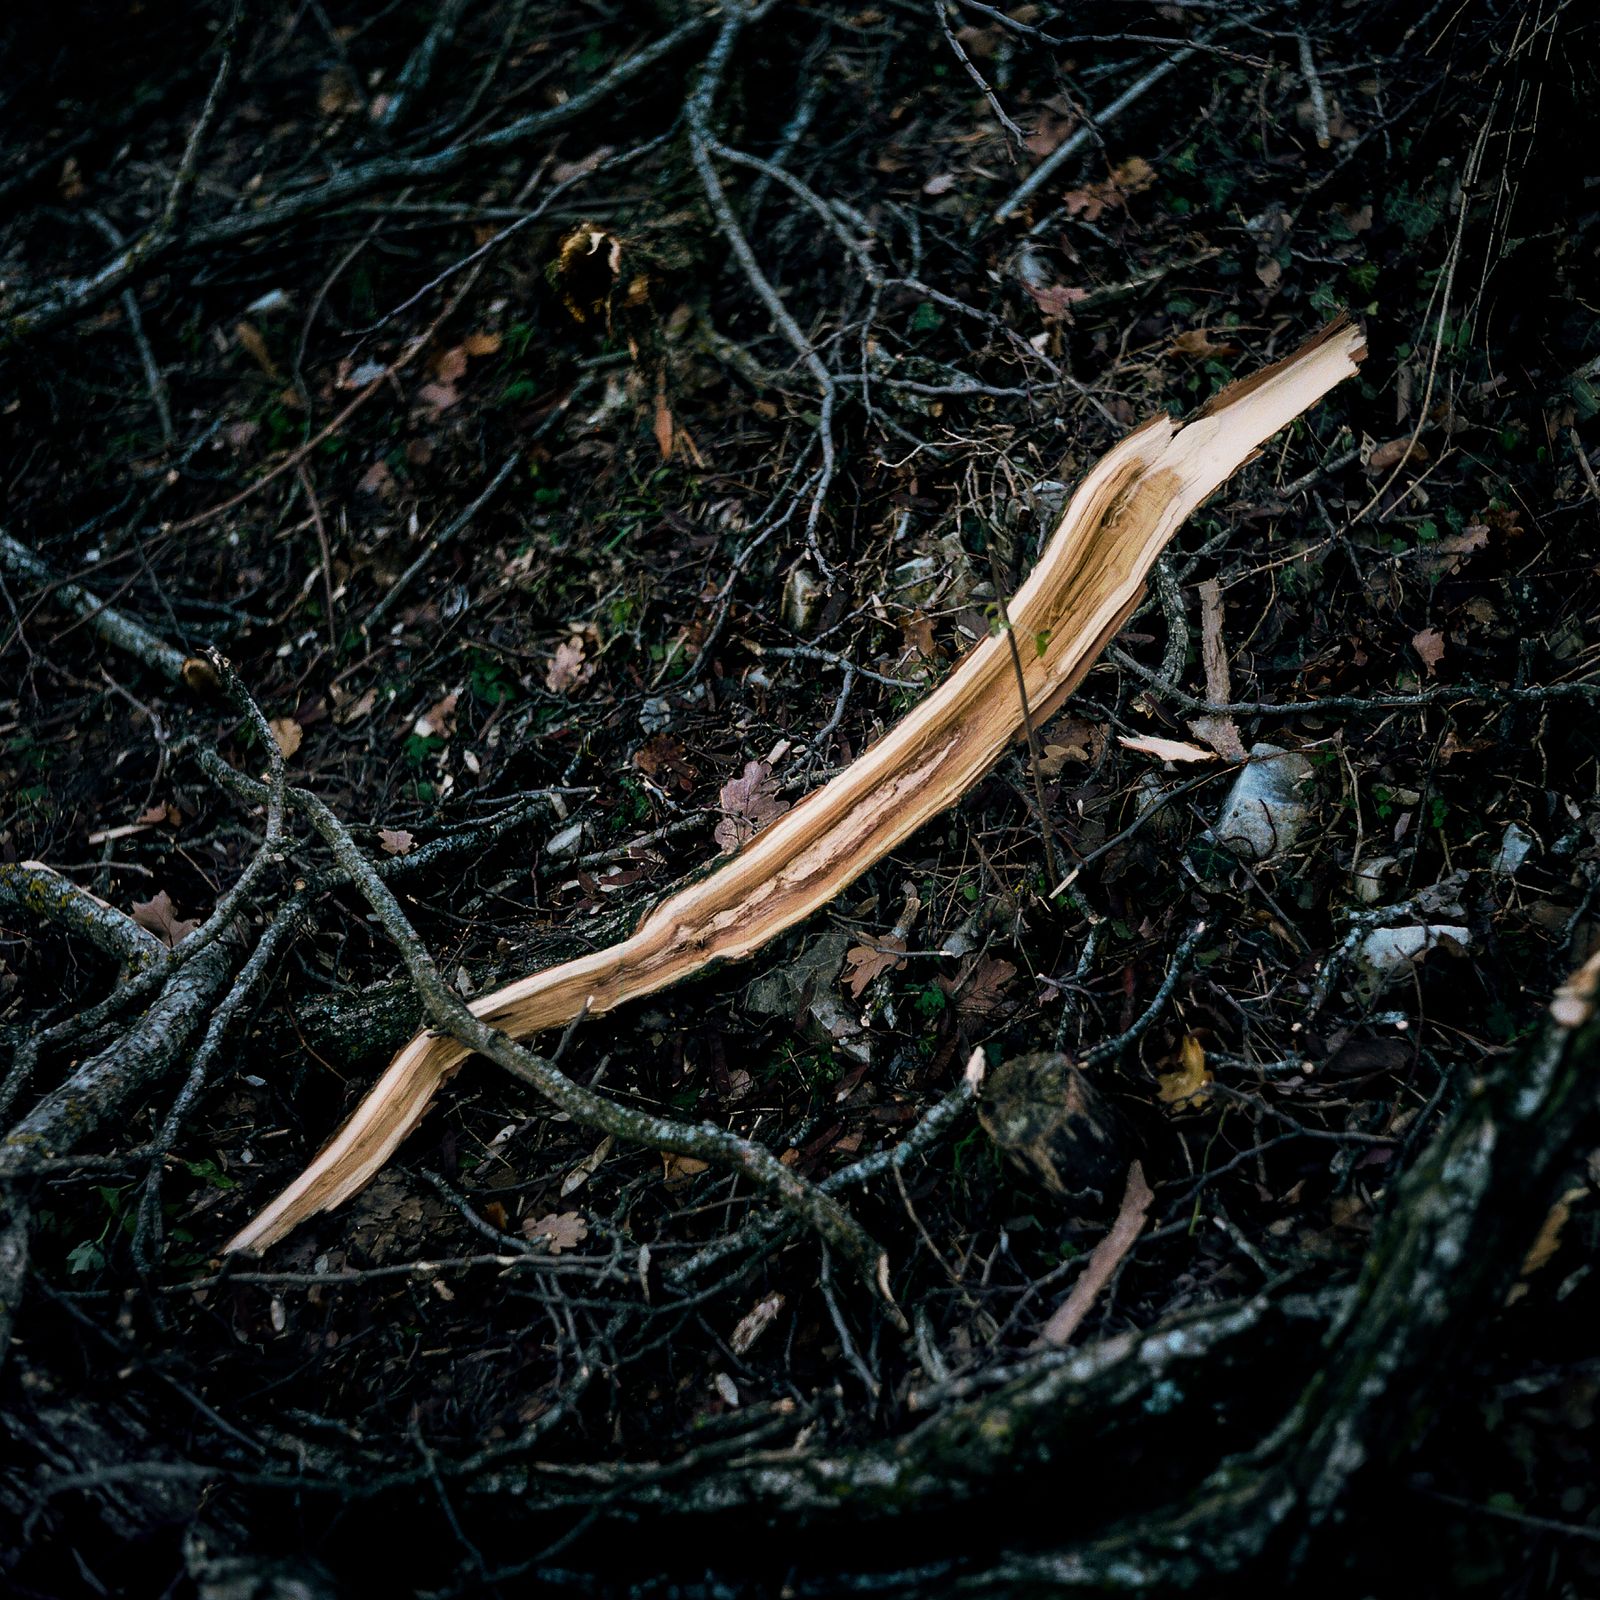 © camilla piana - Image from the The roots are oriented towards water photography project